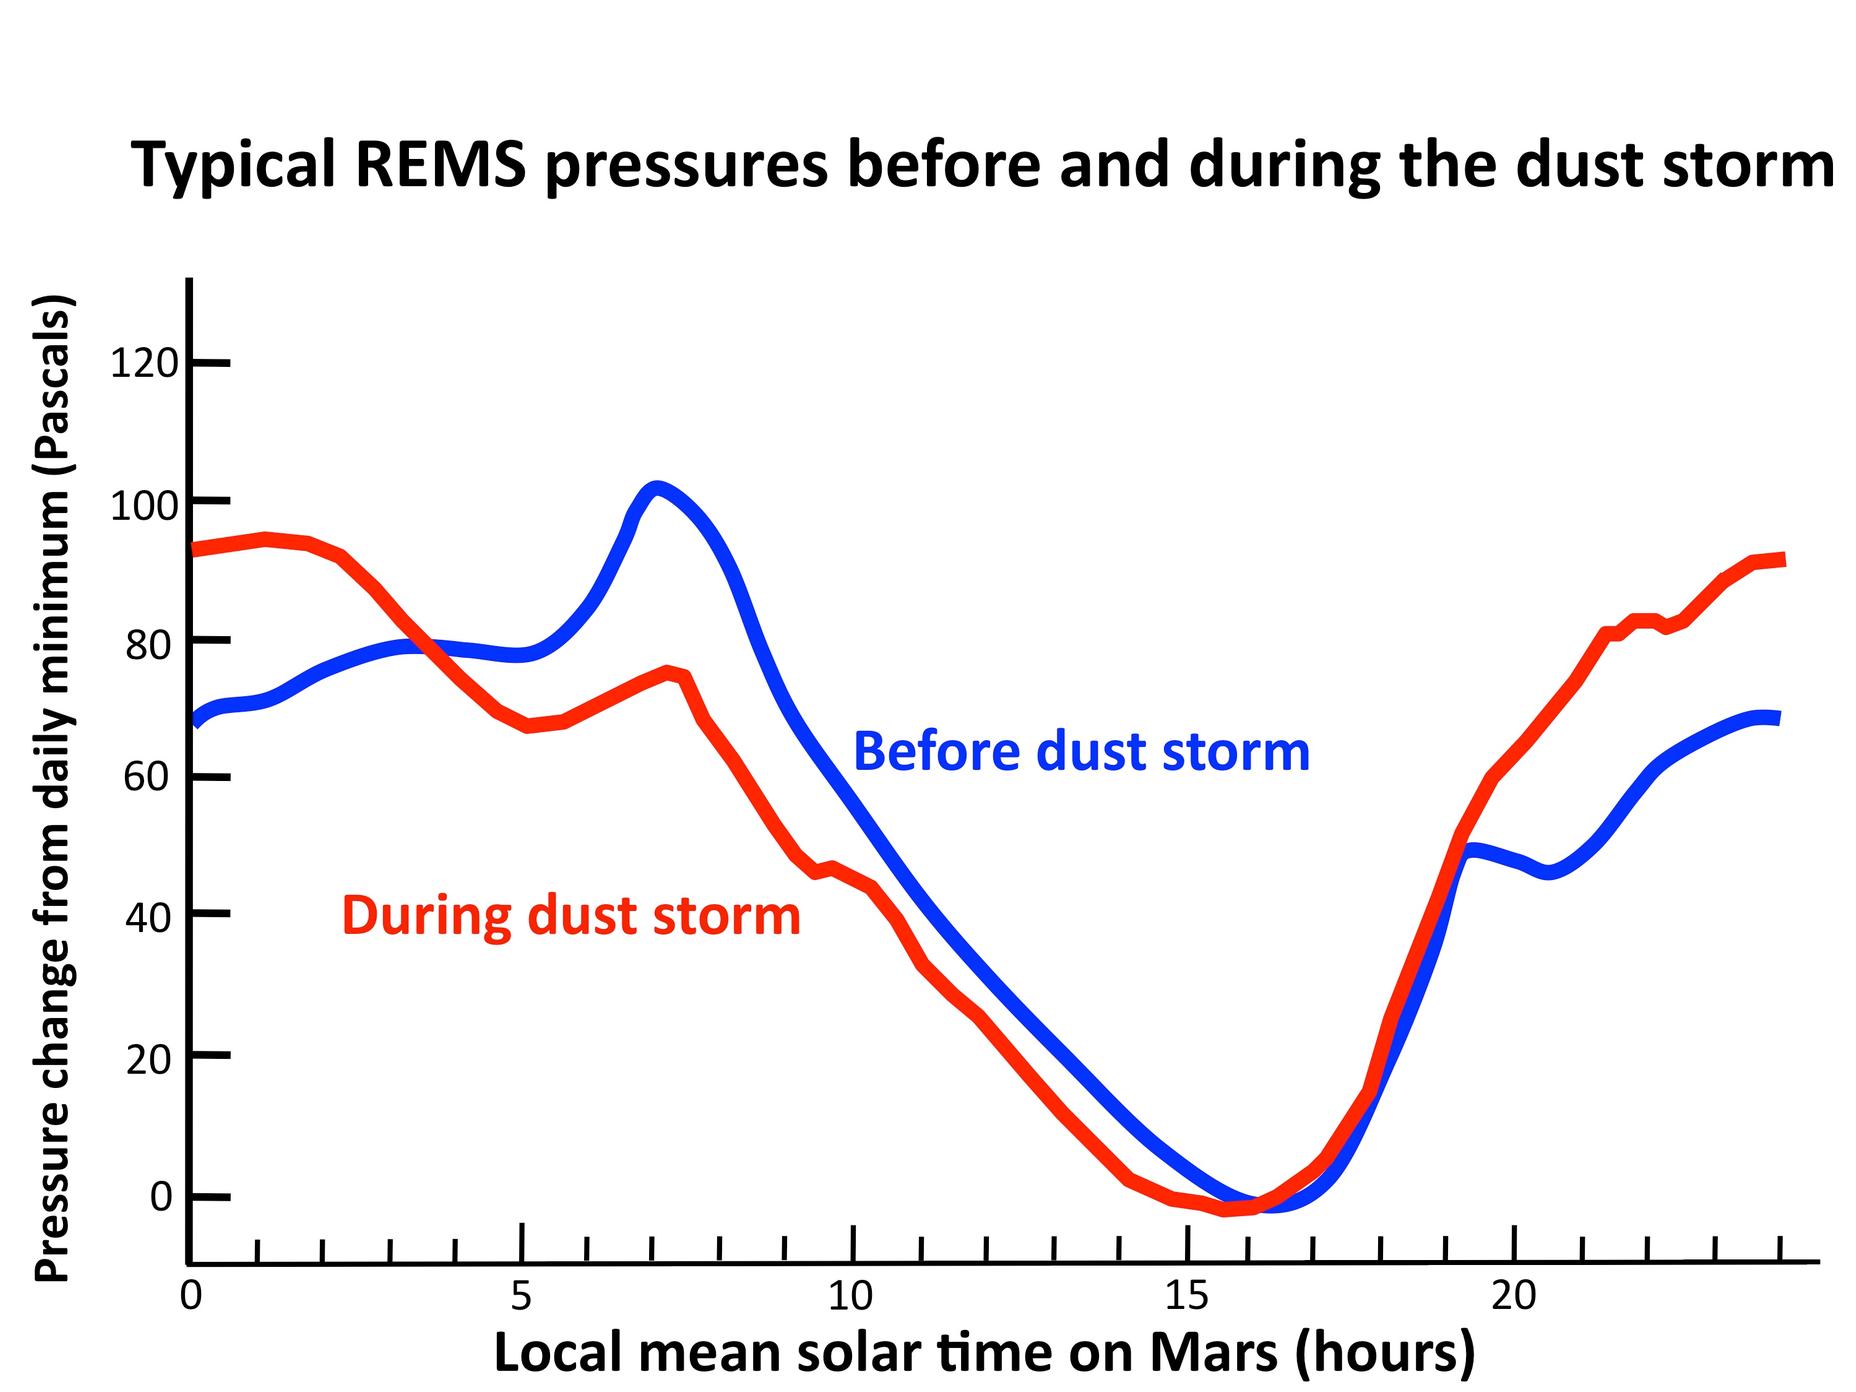 Atmospheric Pressure Patterns Before and During Dust Storm